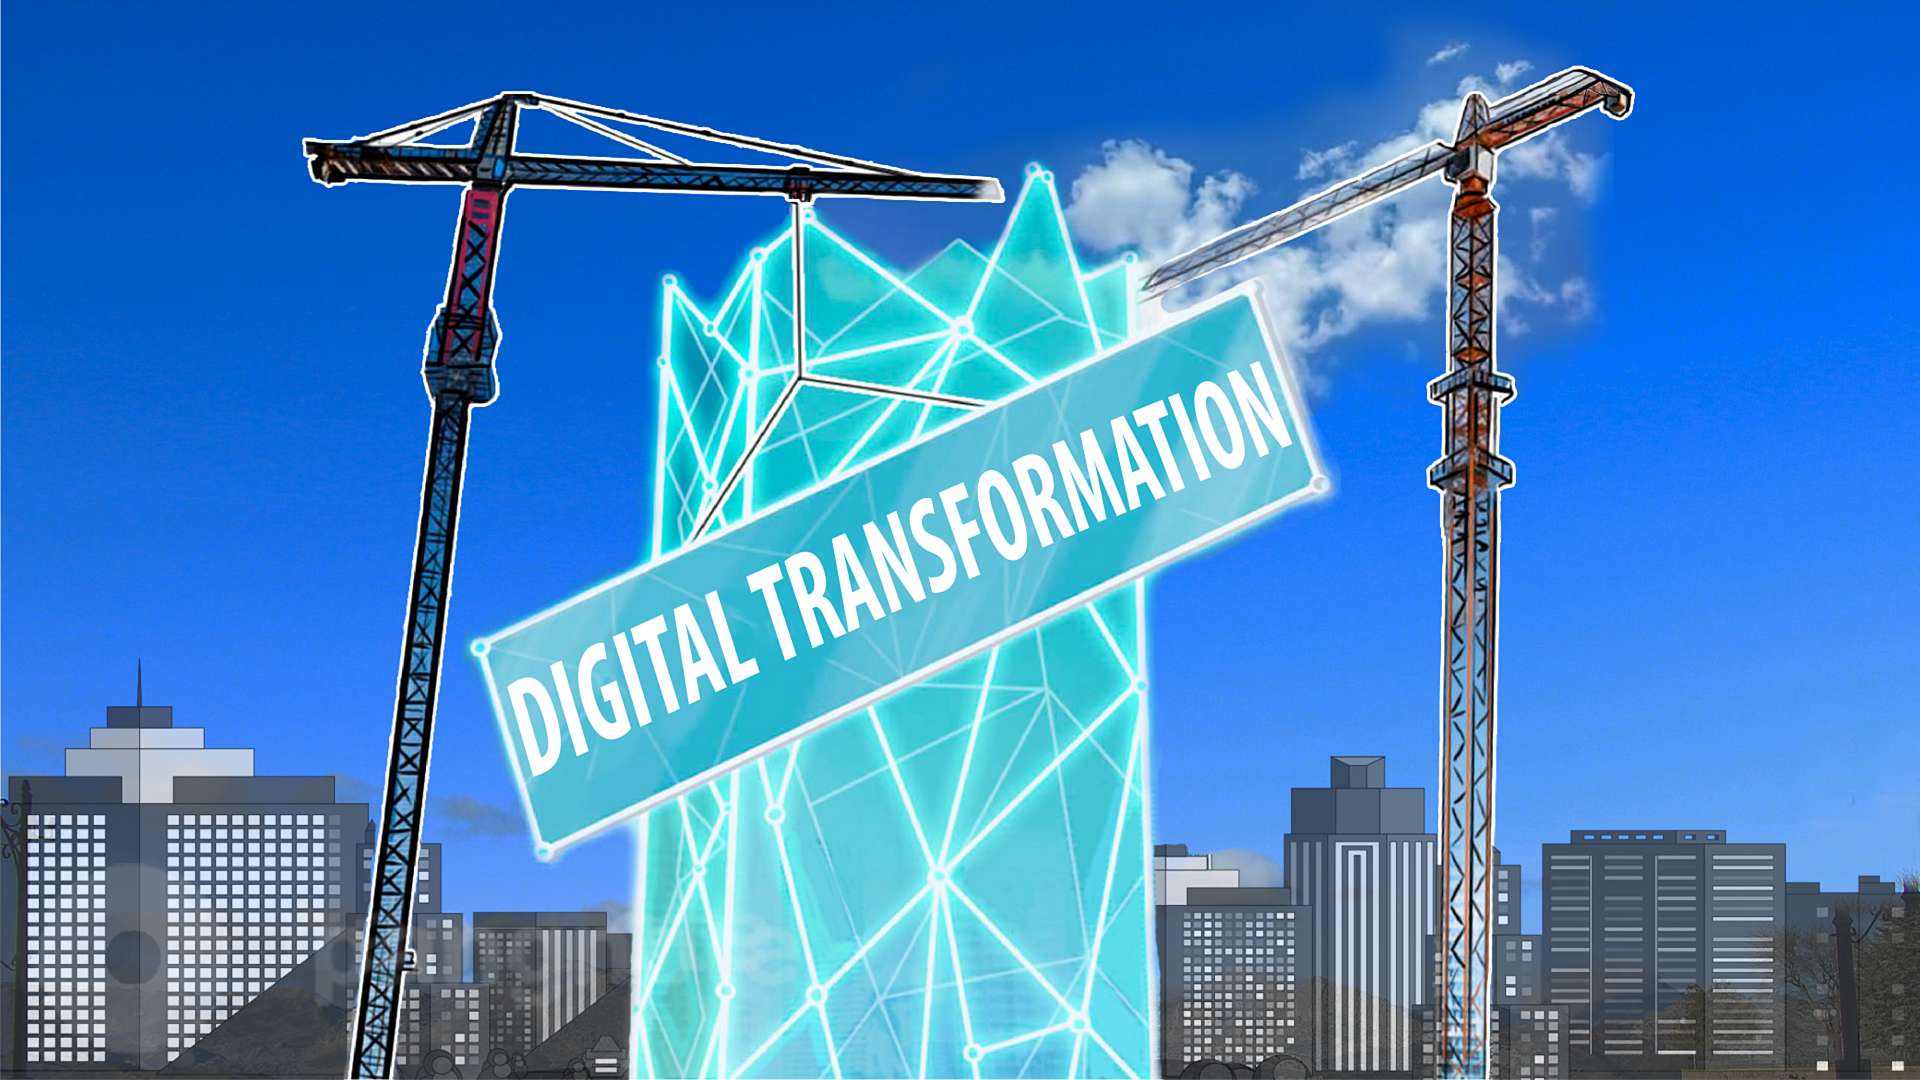 Data Centers are preparing to help with digital transformation